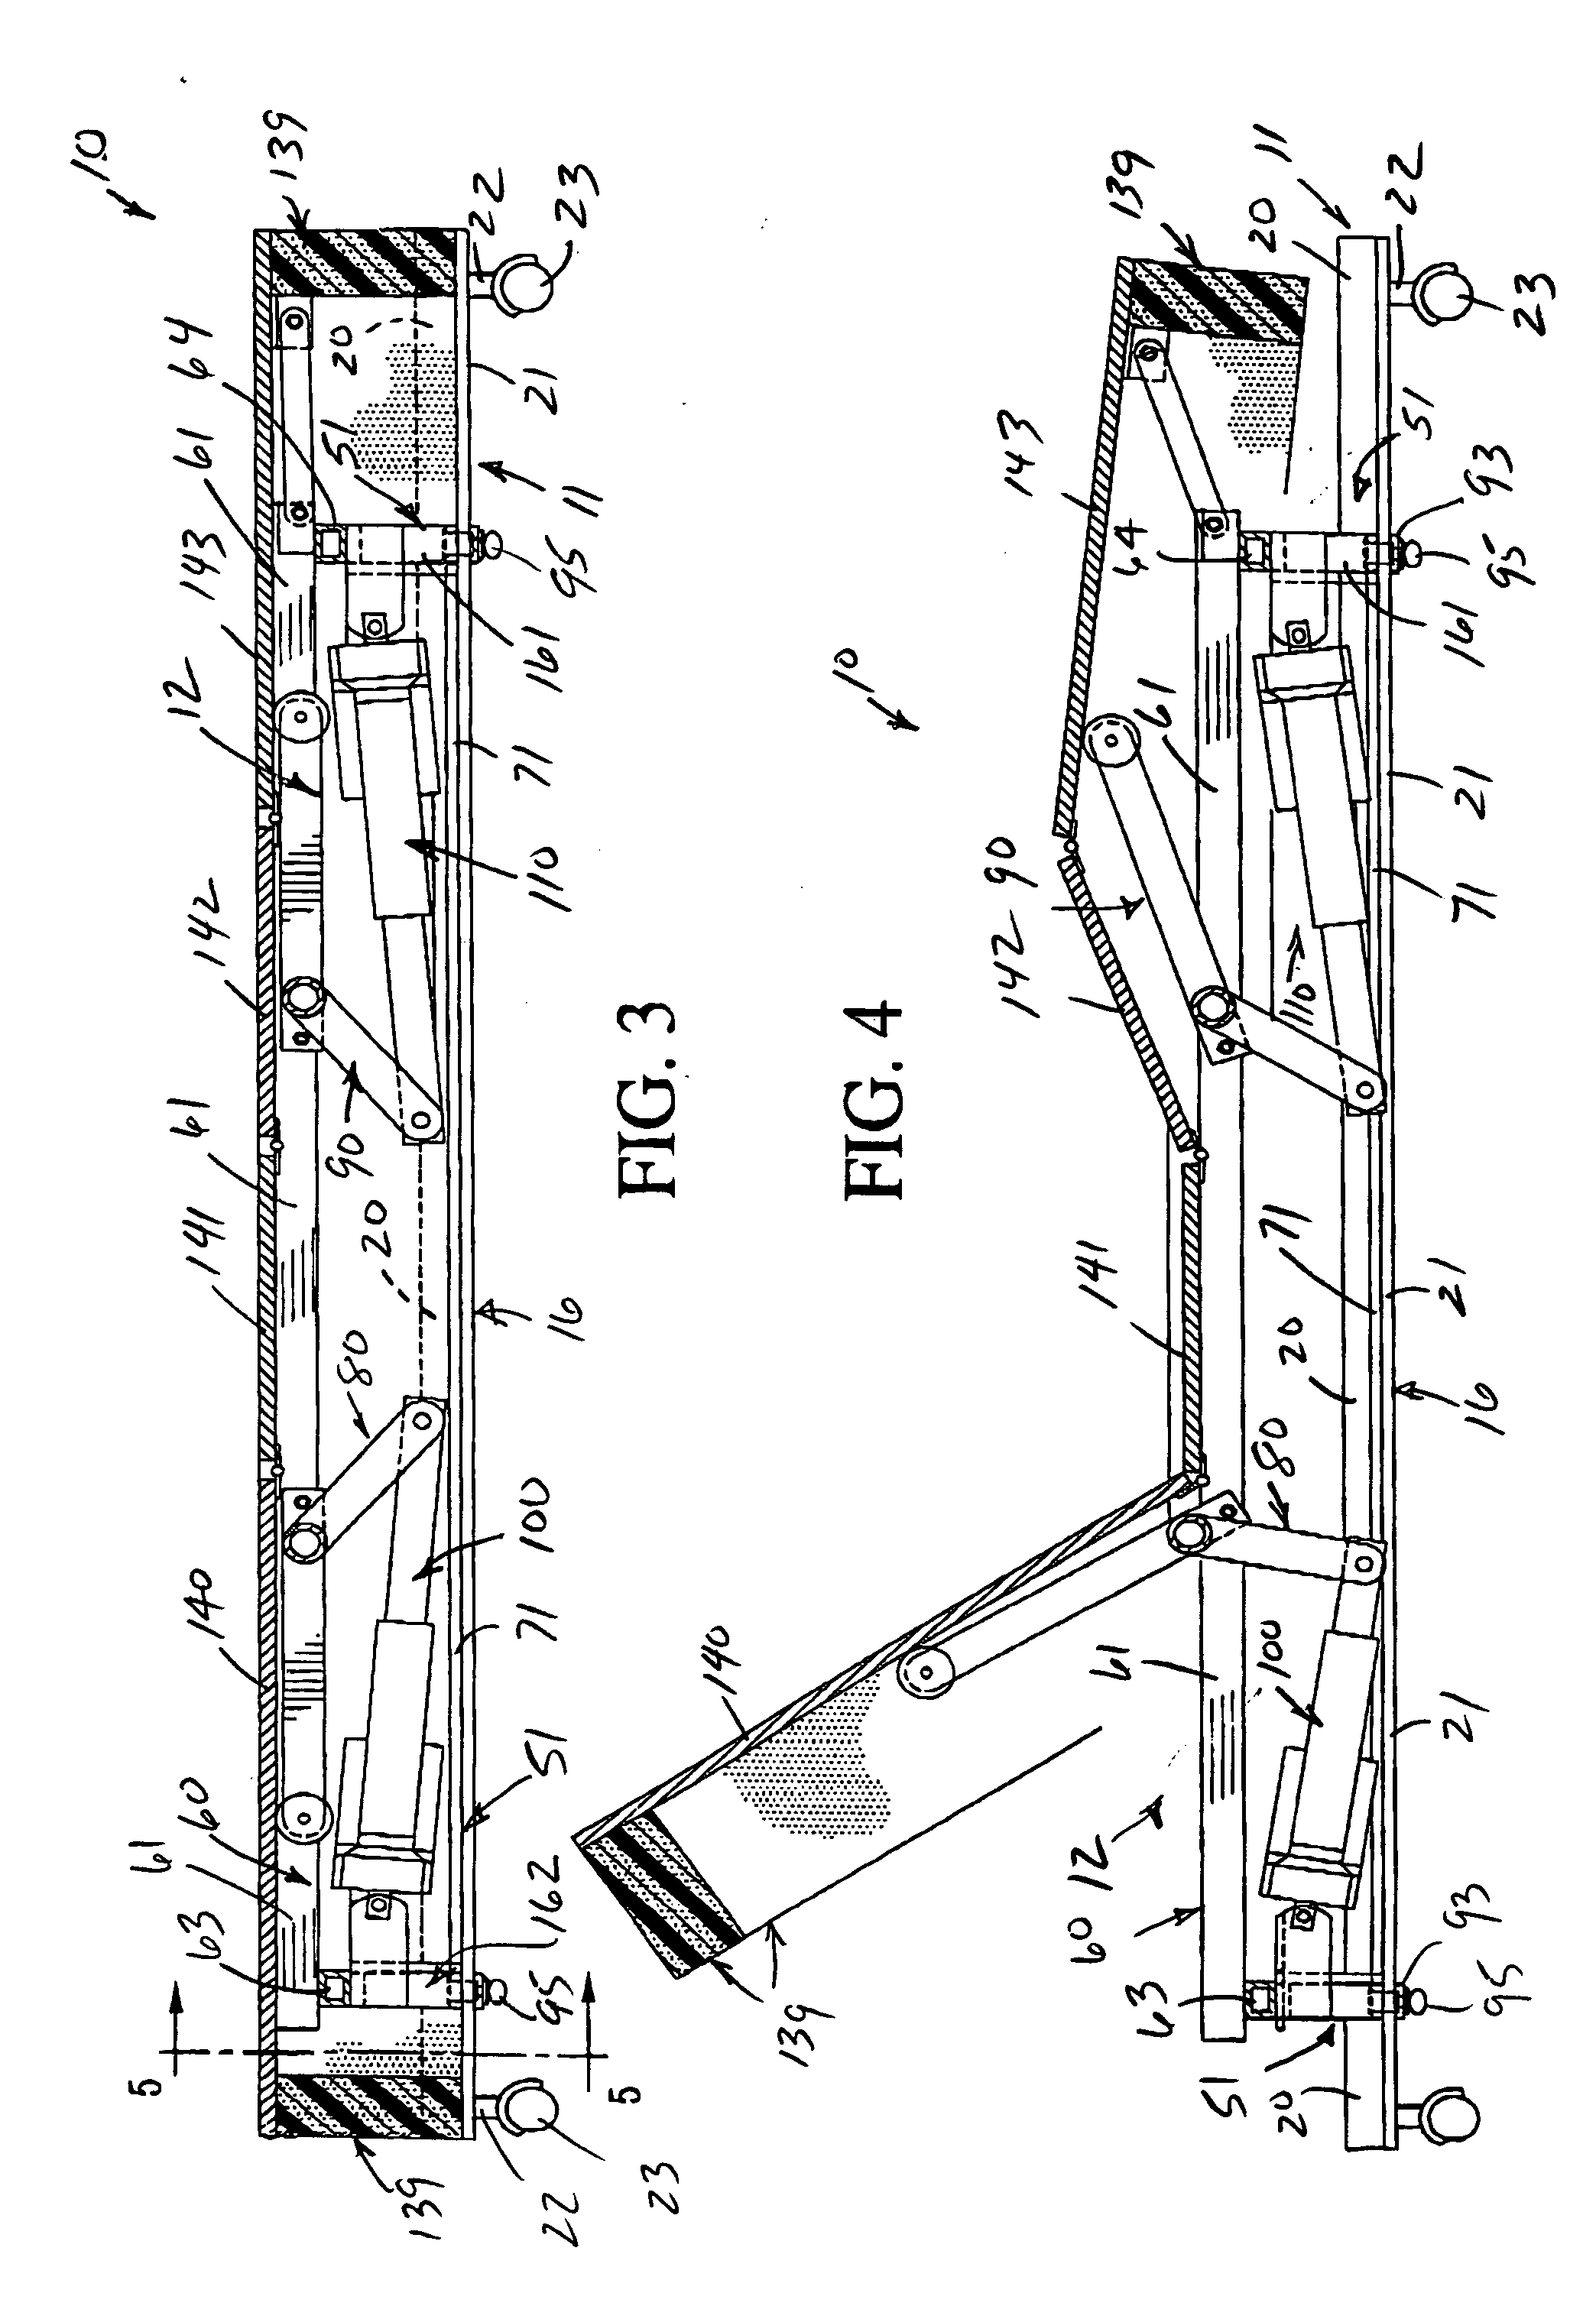 Adjustable base for supporting adjustable beds of different widths